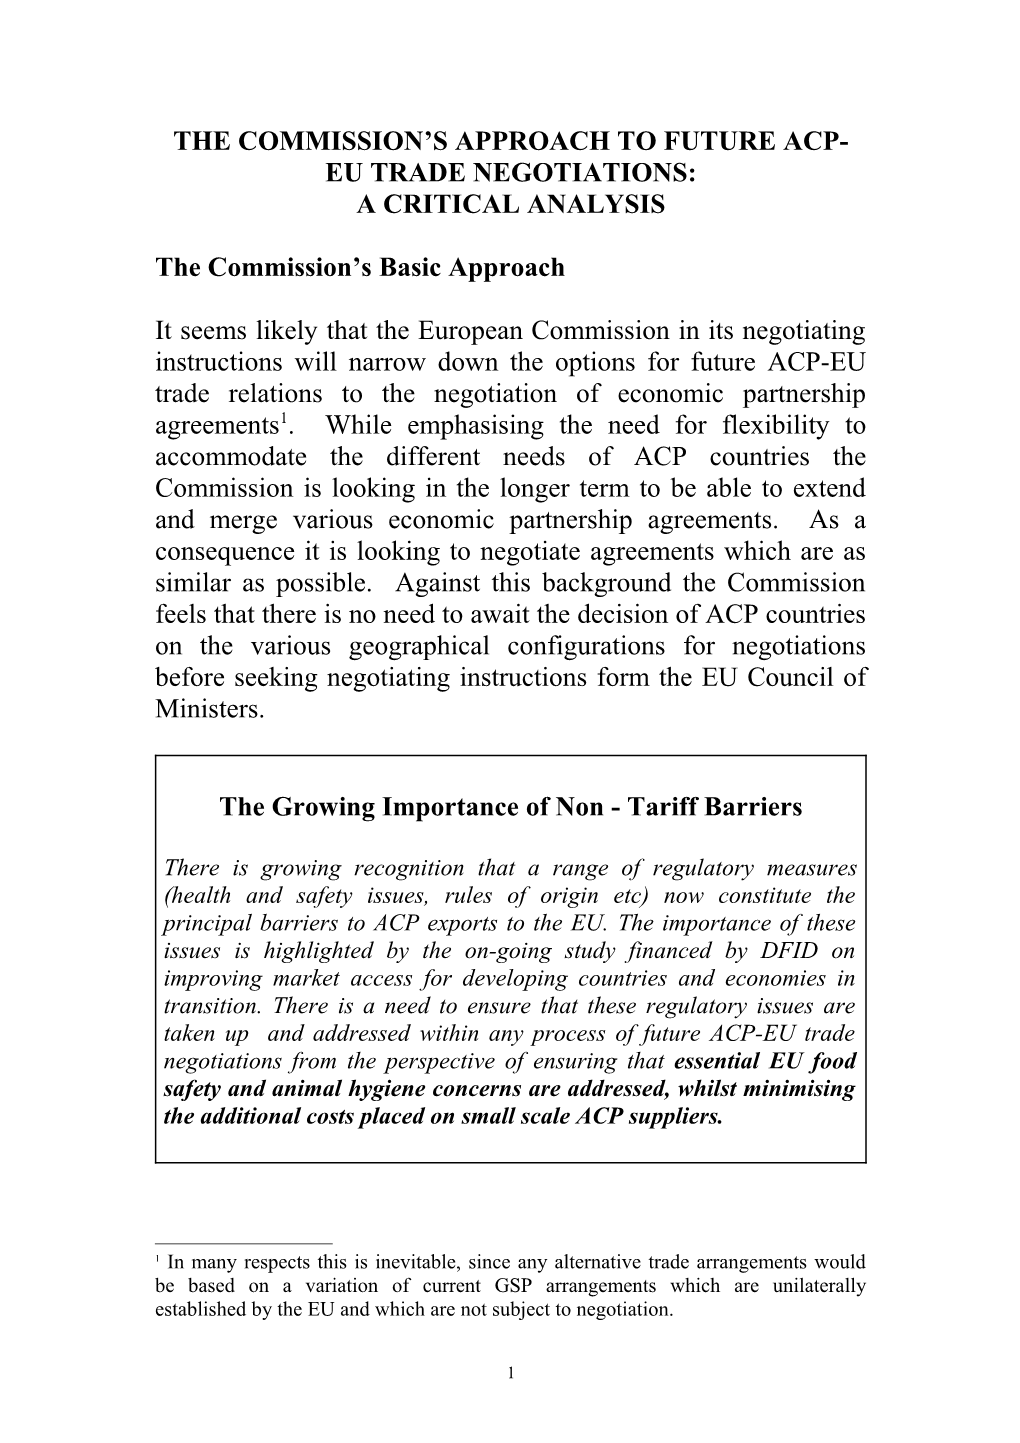 The Commission S Approach to Future Acp-Eu Trade Negotiations